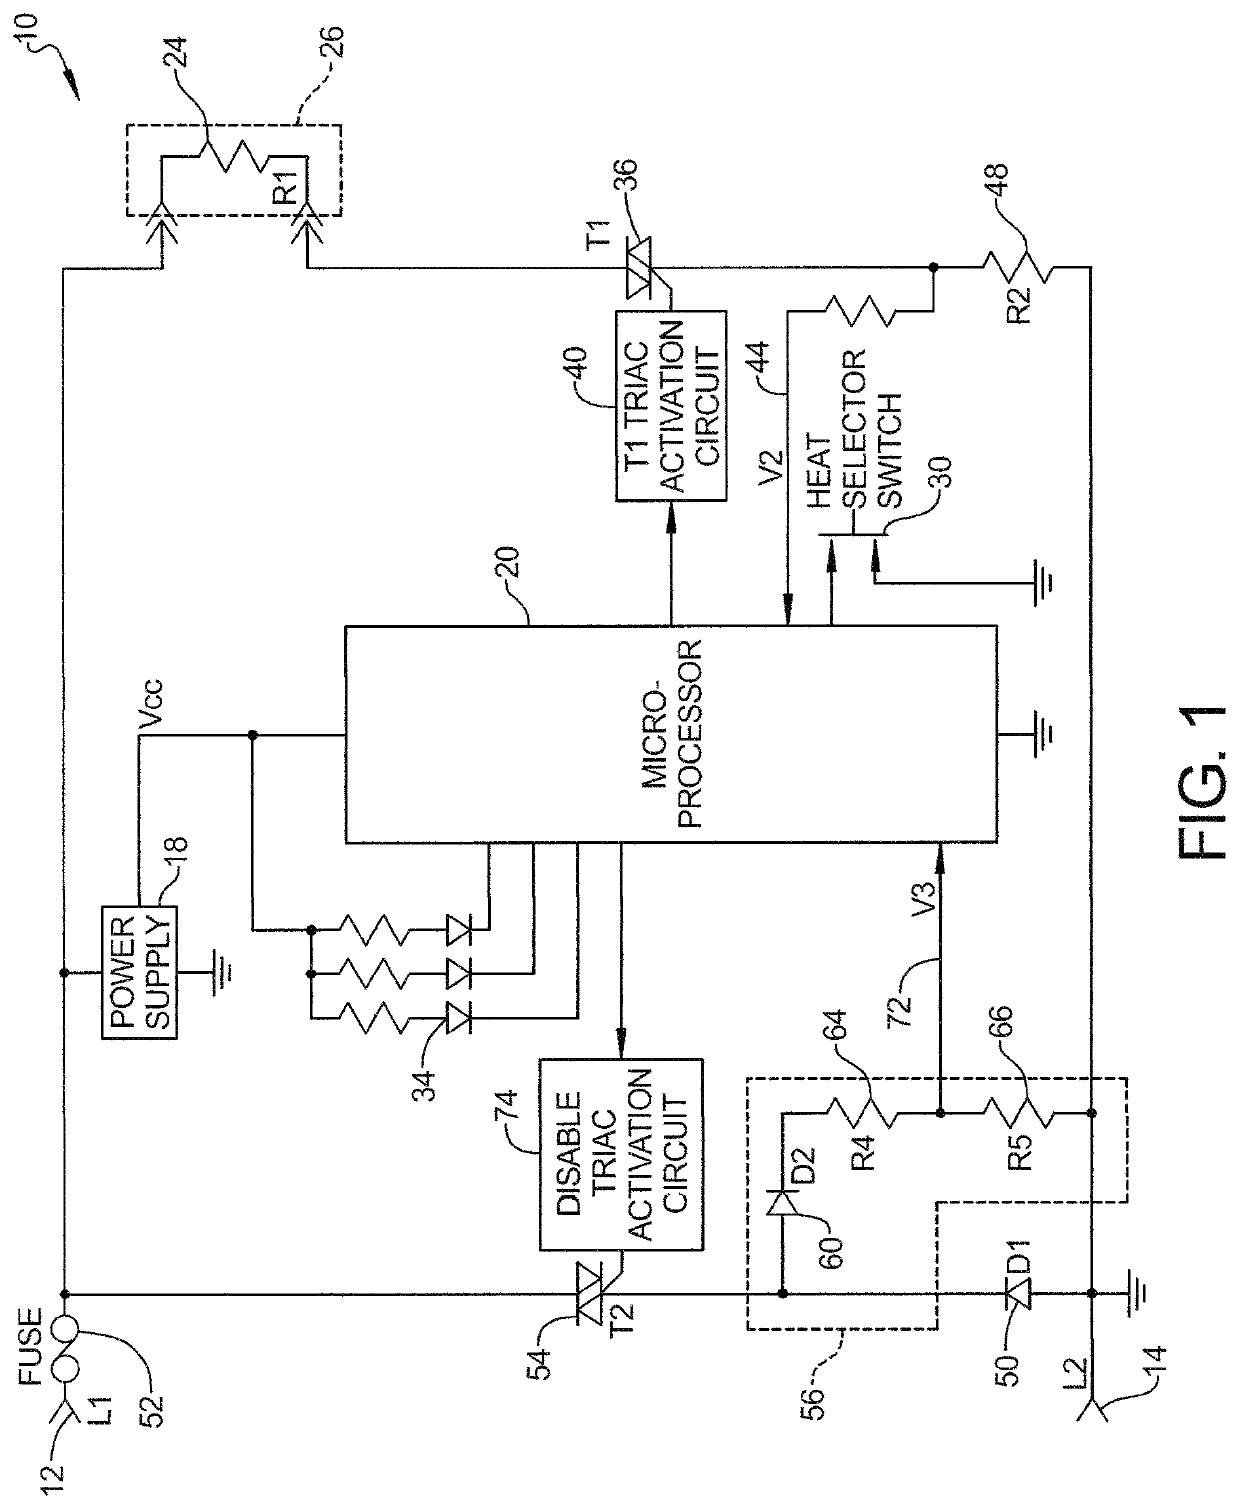 Safety circuits for electric heating element